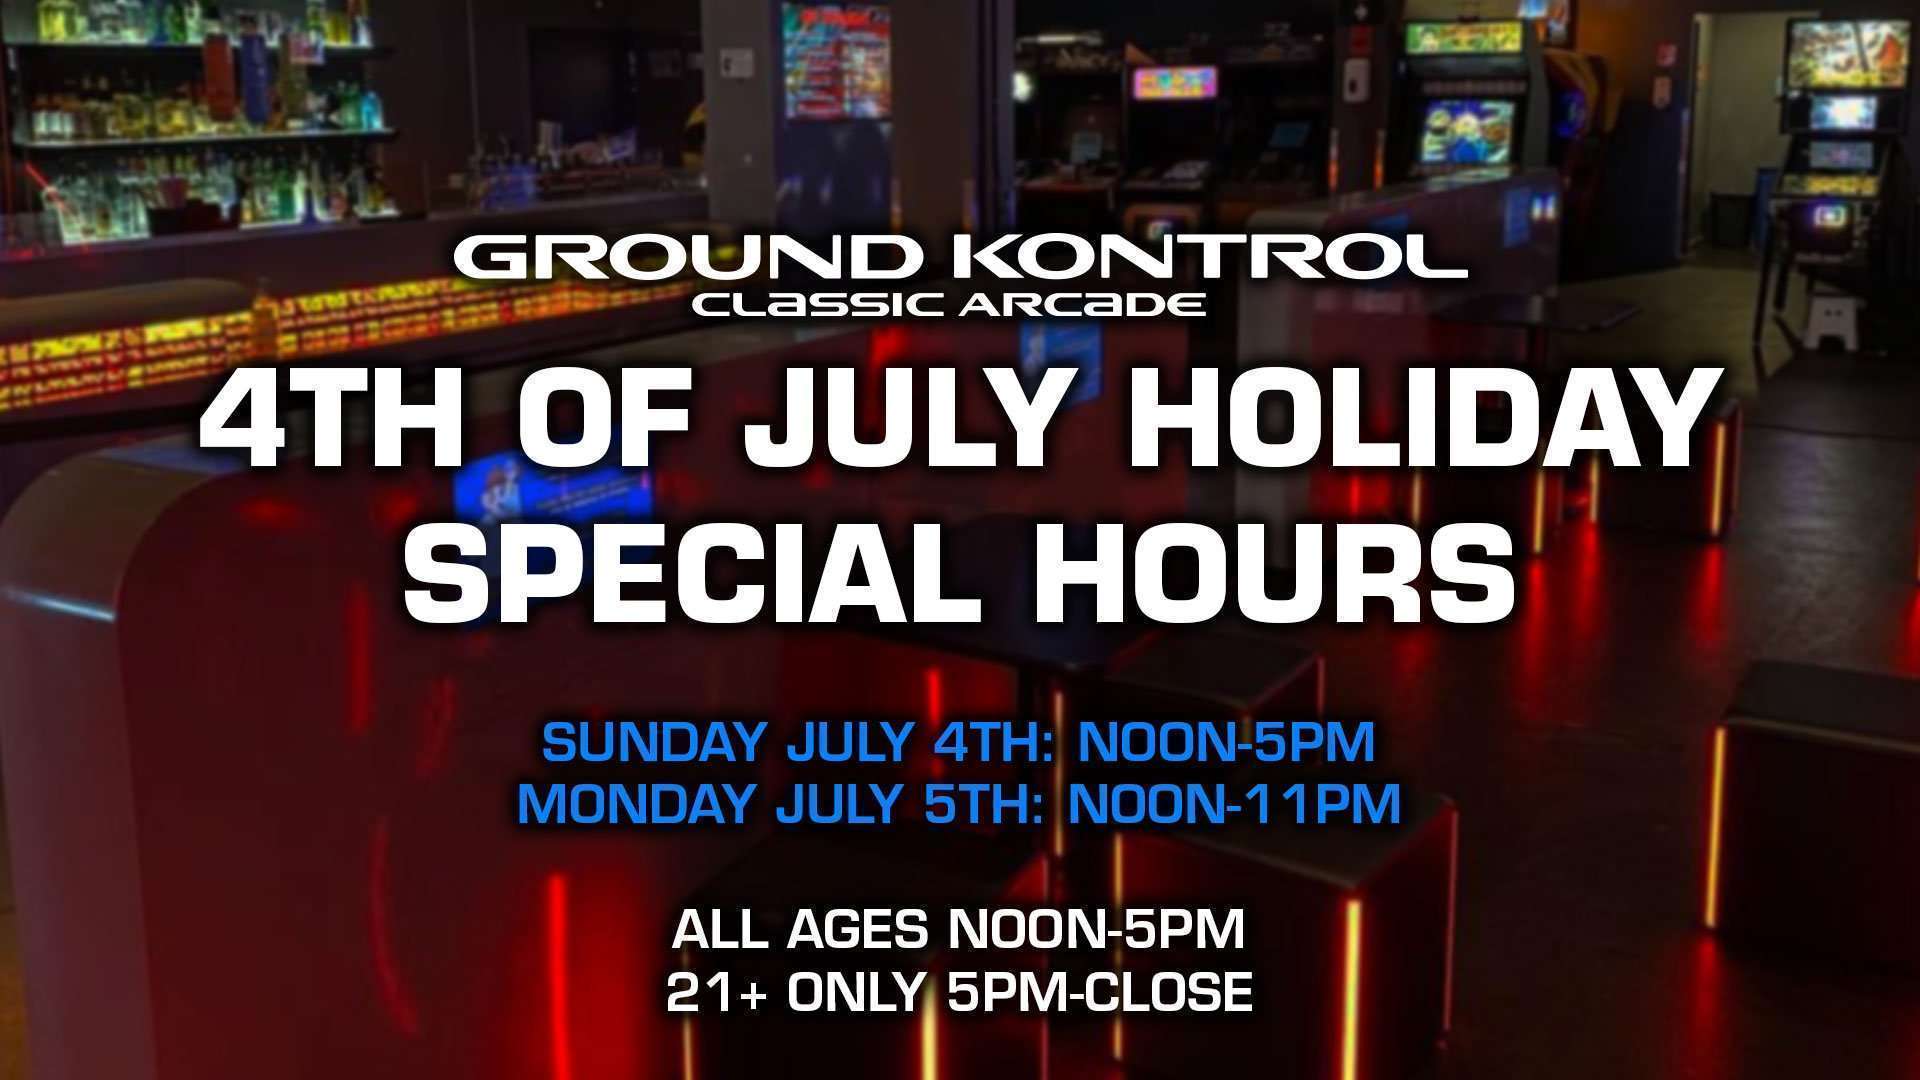 SPECIAL HOURS: Fourth of July Holiday